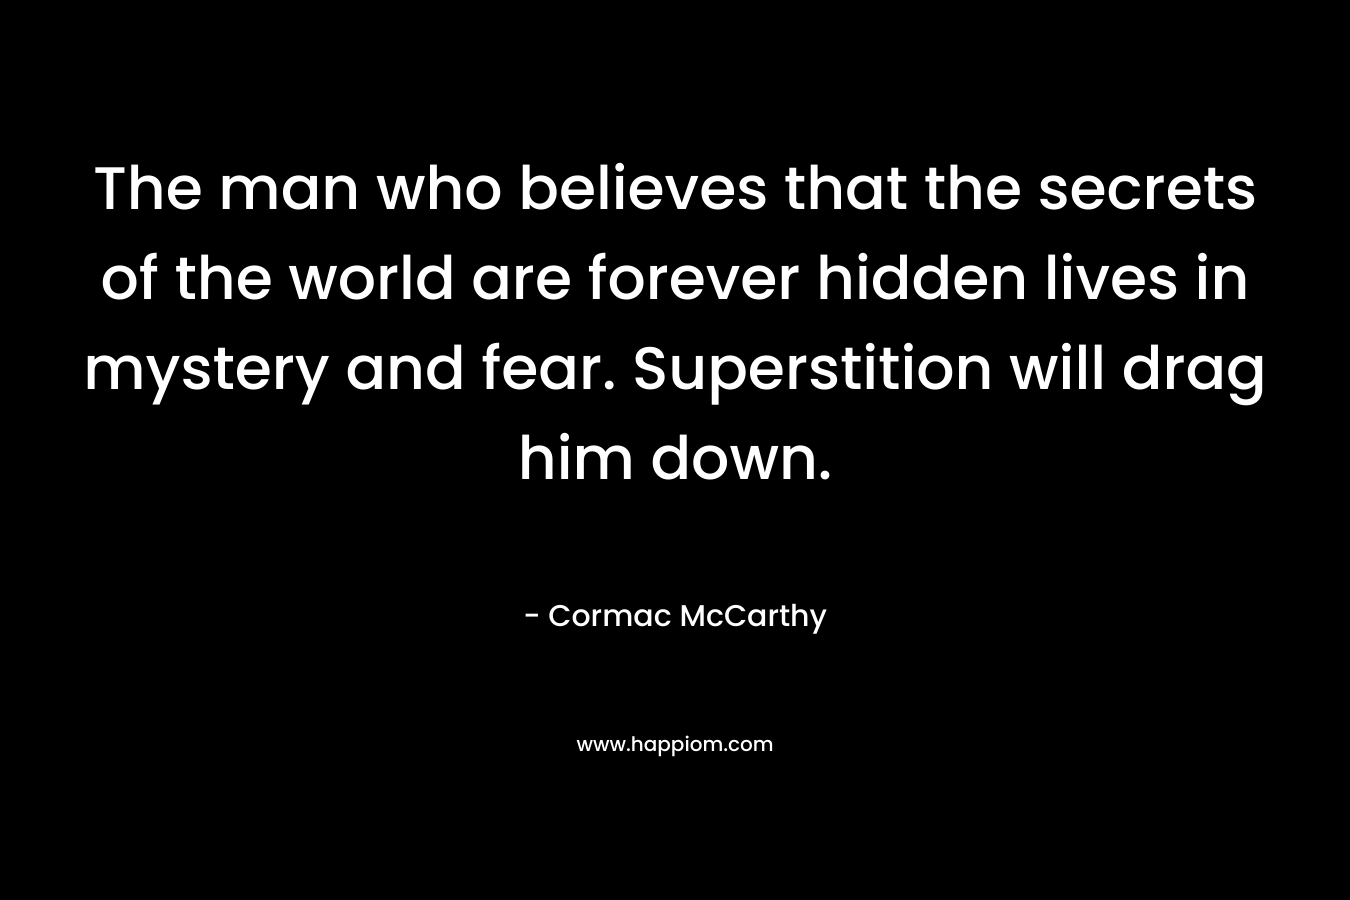 The man who believes that the secrets of the world are forever hidden lives in mystery and fear. Superstition will drag him down. – Cormac McCarthy